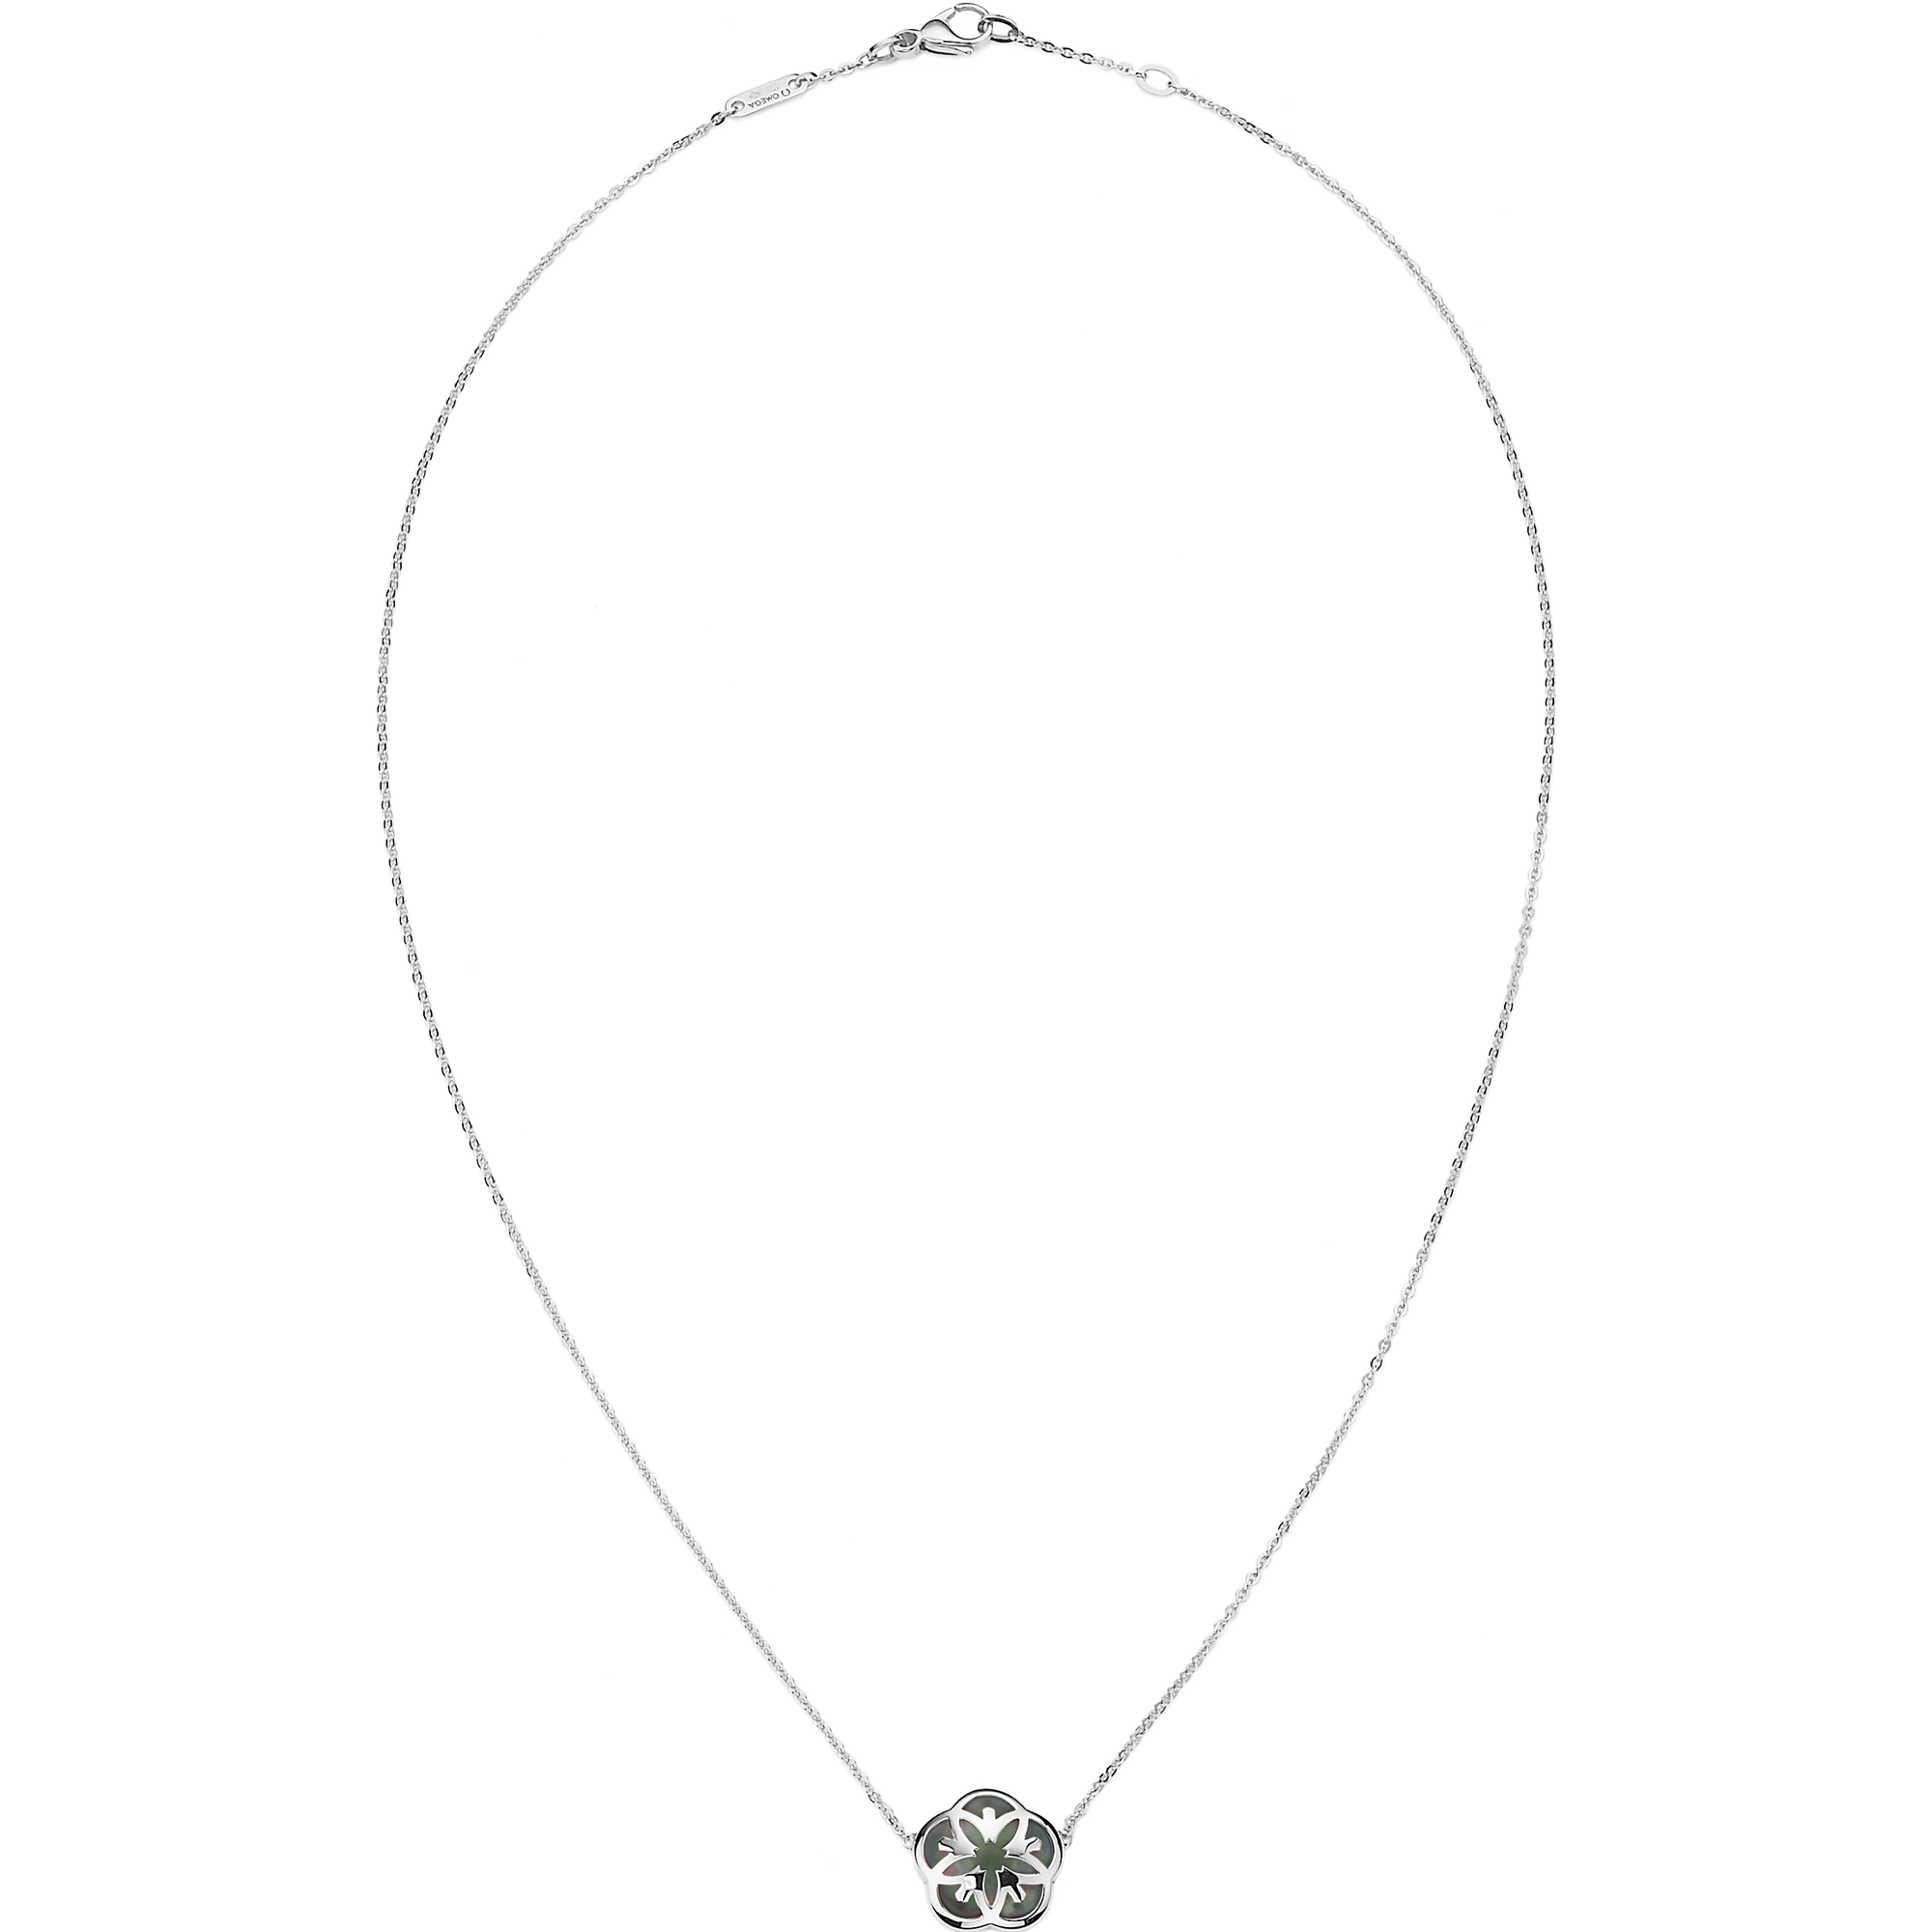 Omega Flower Necklace, 18K white gold, Tahiti Mother-of-Pearl